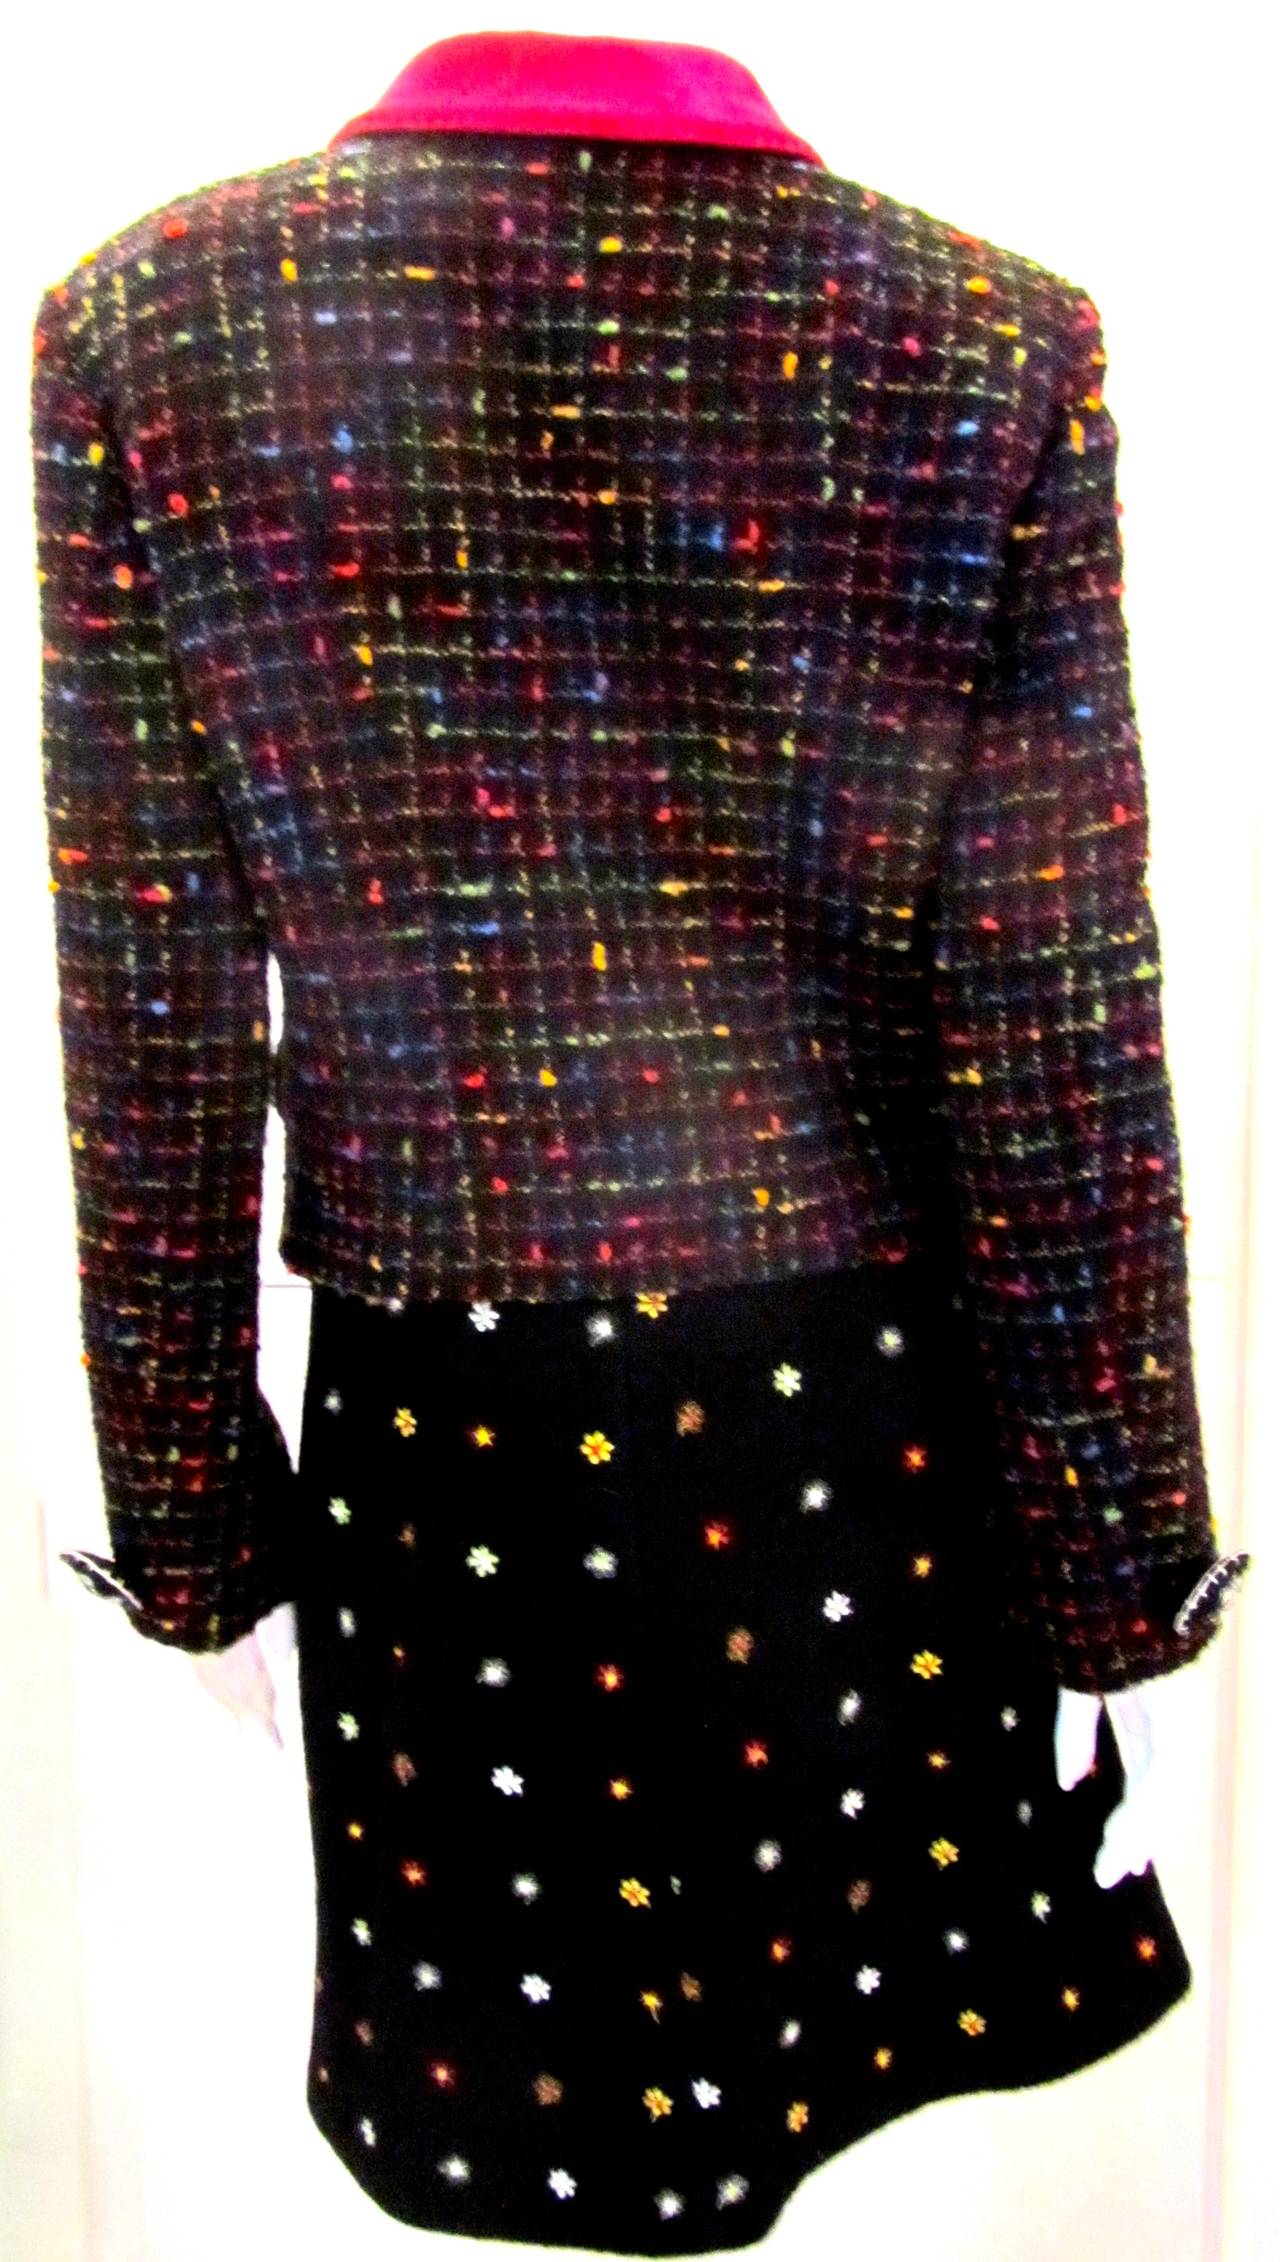 USA Size 10 

Please pay attention to measurements as Moschino runs small. 

The waist on the skirt - 29
Top to bottom of the skirt - 20 inches
Hips - 37 inches

Black boucle wool with multi colored flowers including green, yellow, and